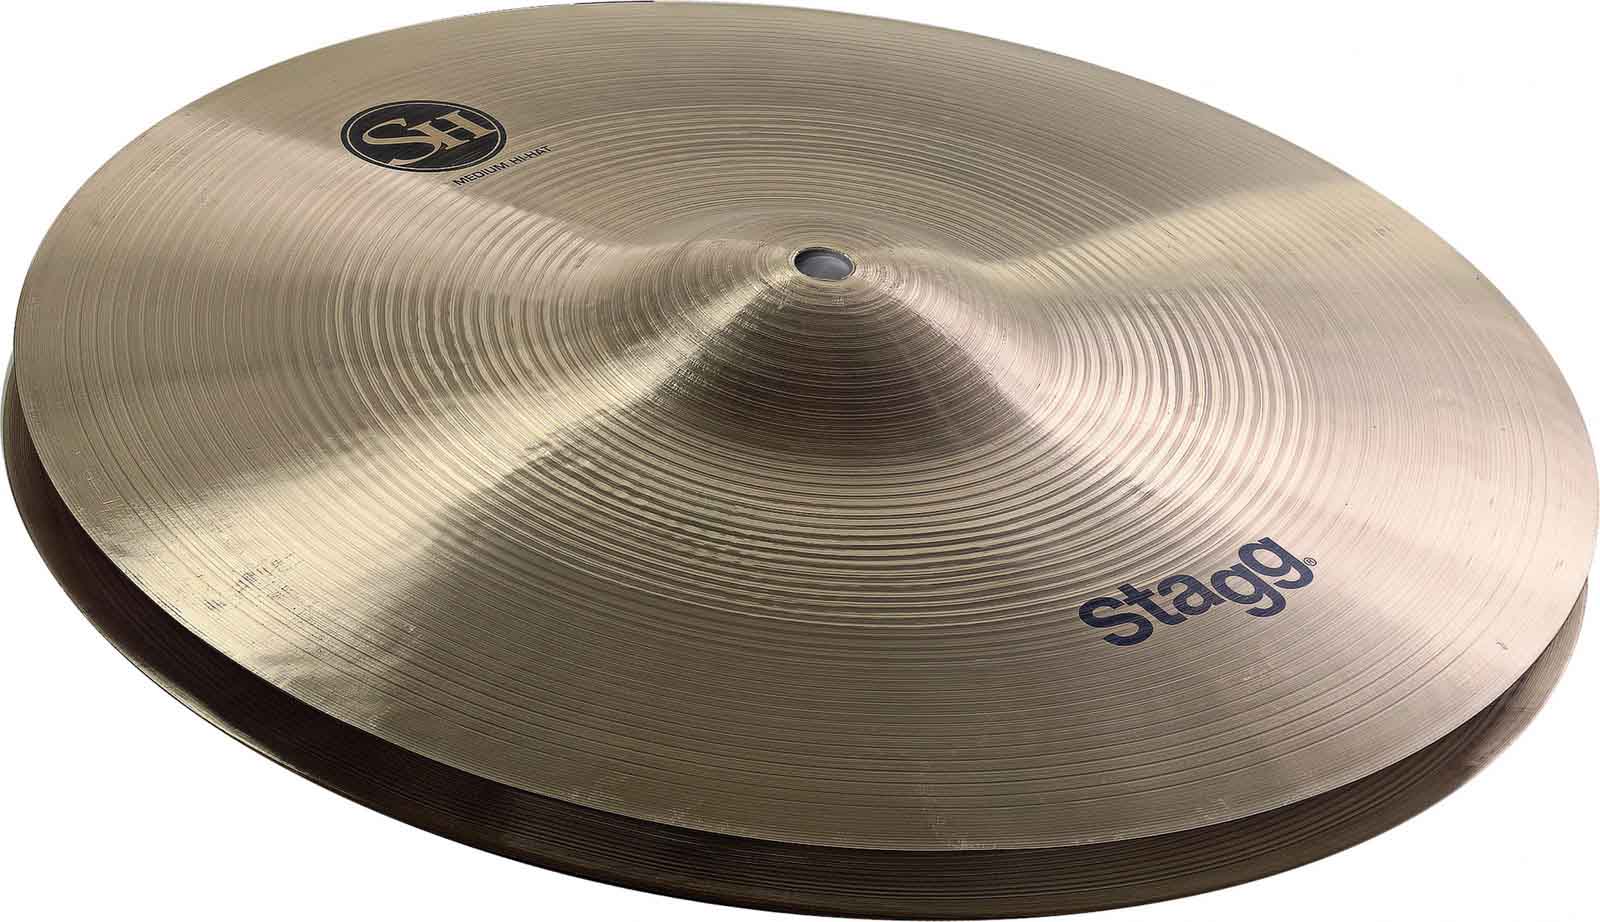 STAGG SH SERIES 12